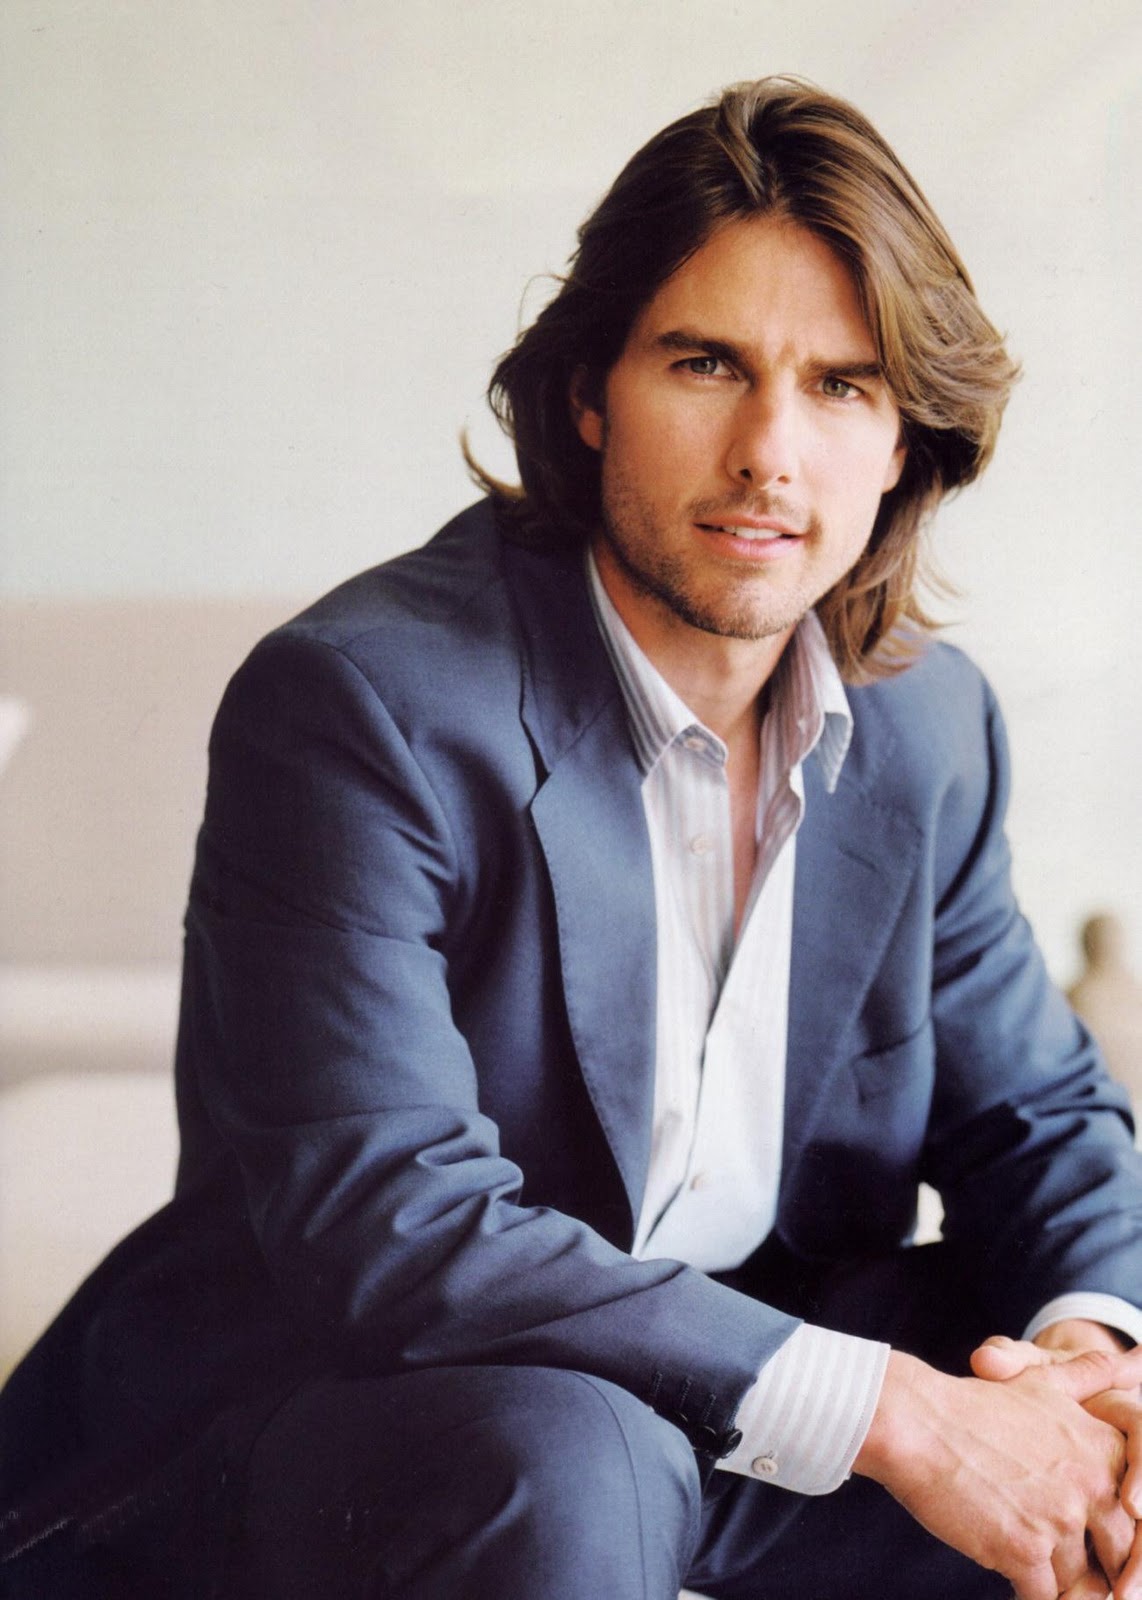 Hairstyles for men: Tom Cruise Hair - The Sleek Appearance 